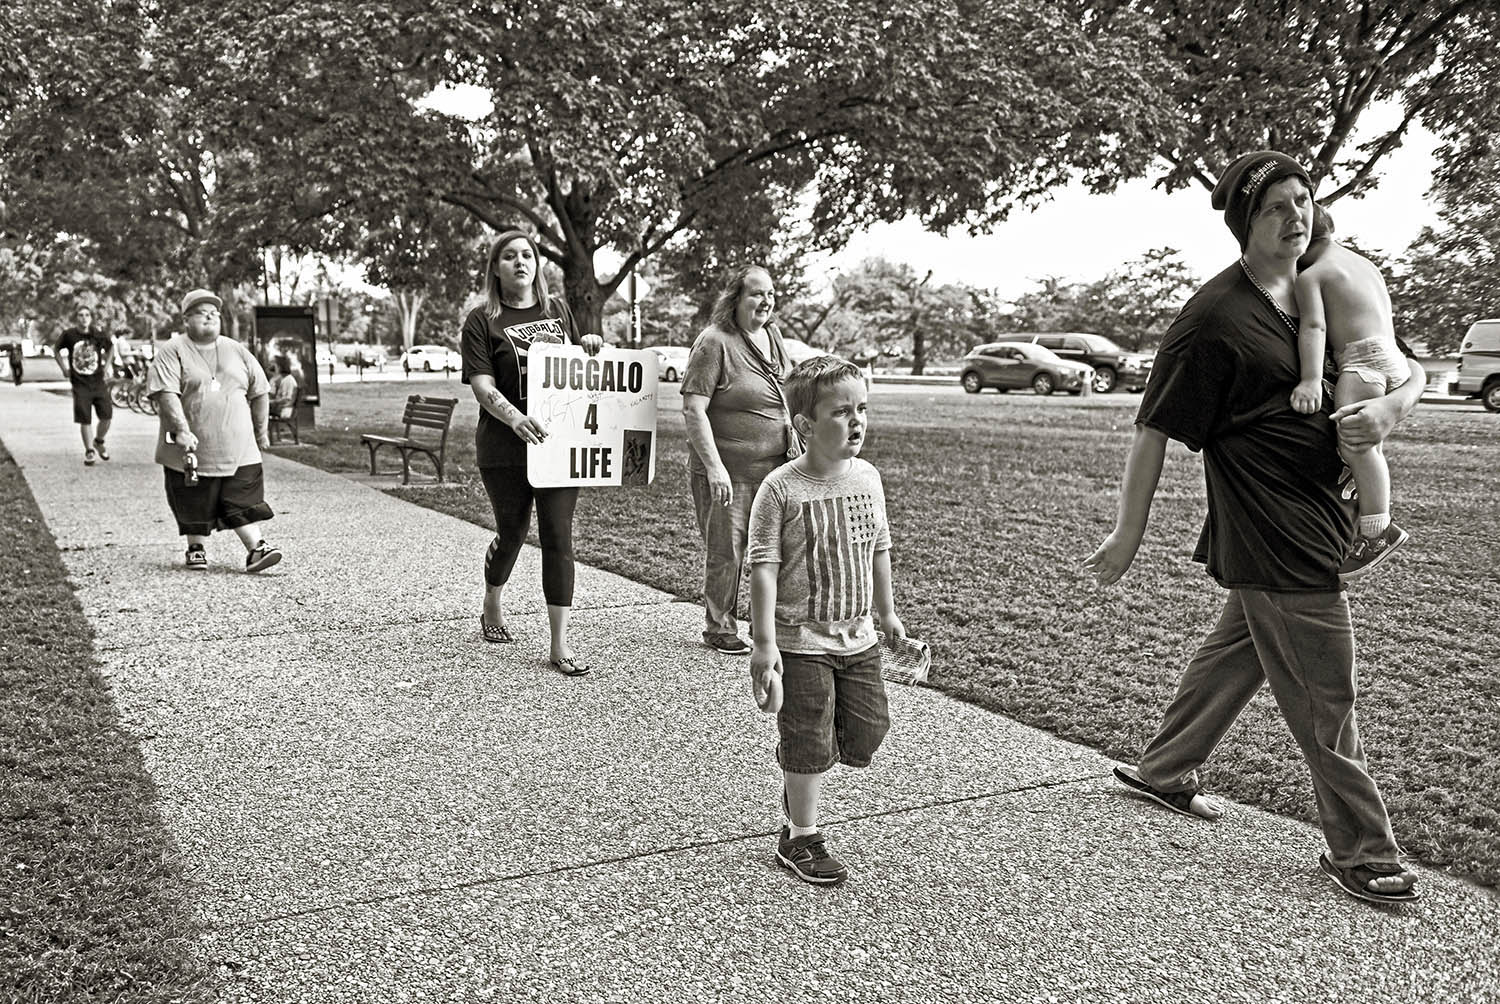 Family_Protest_March_Juggalo_Supporters_WashingtonDC_Black-and-White.jpg